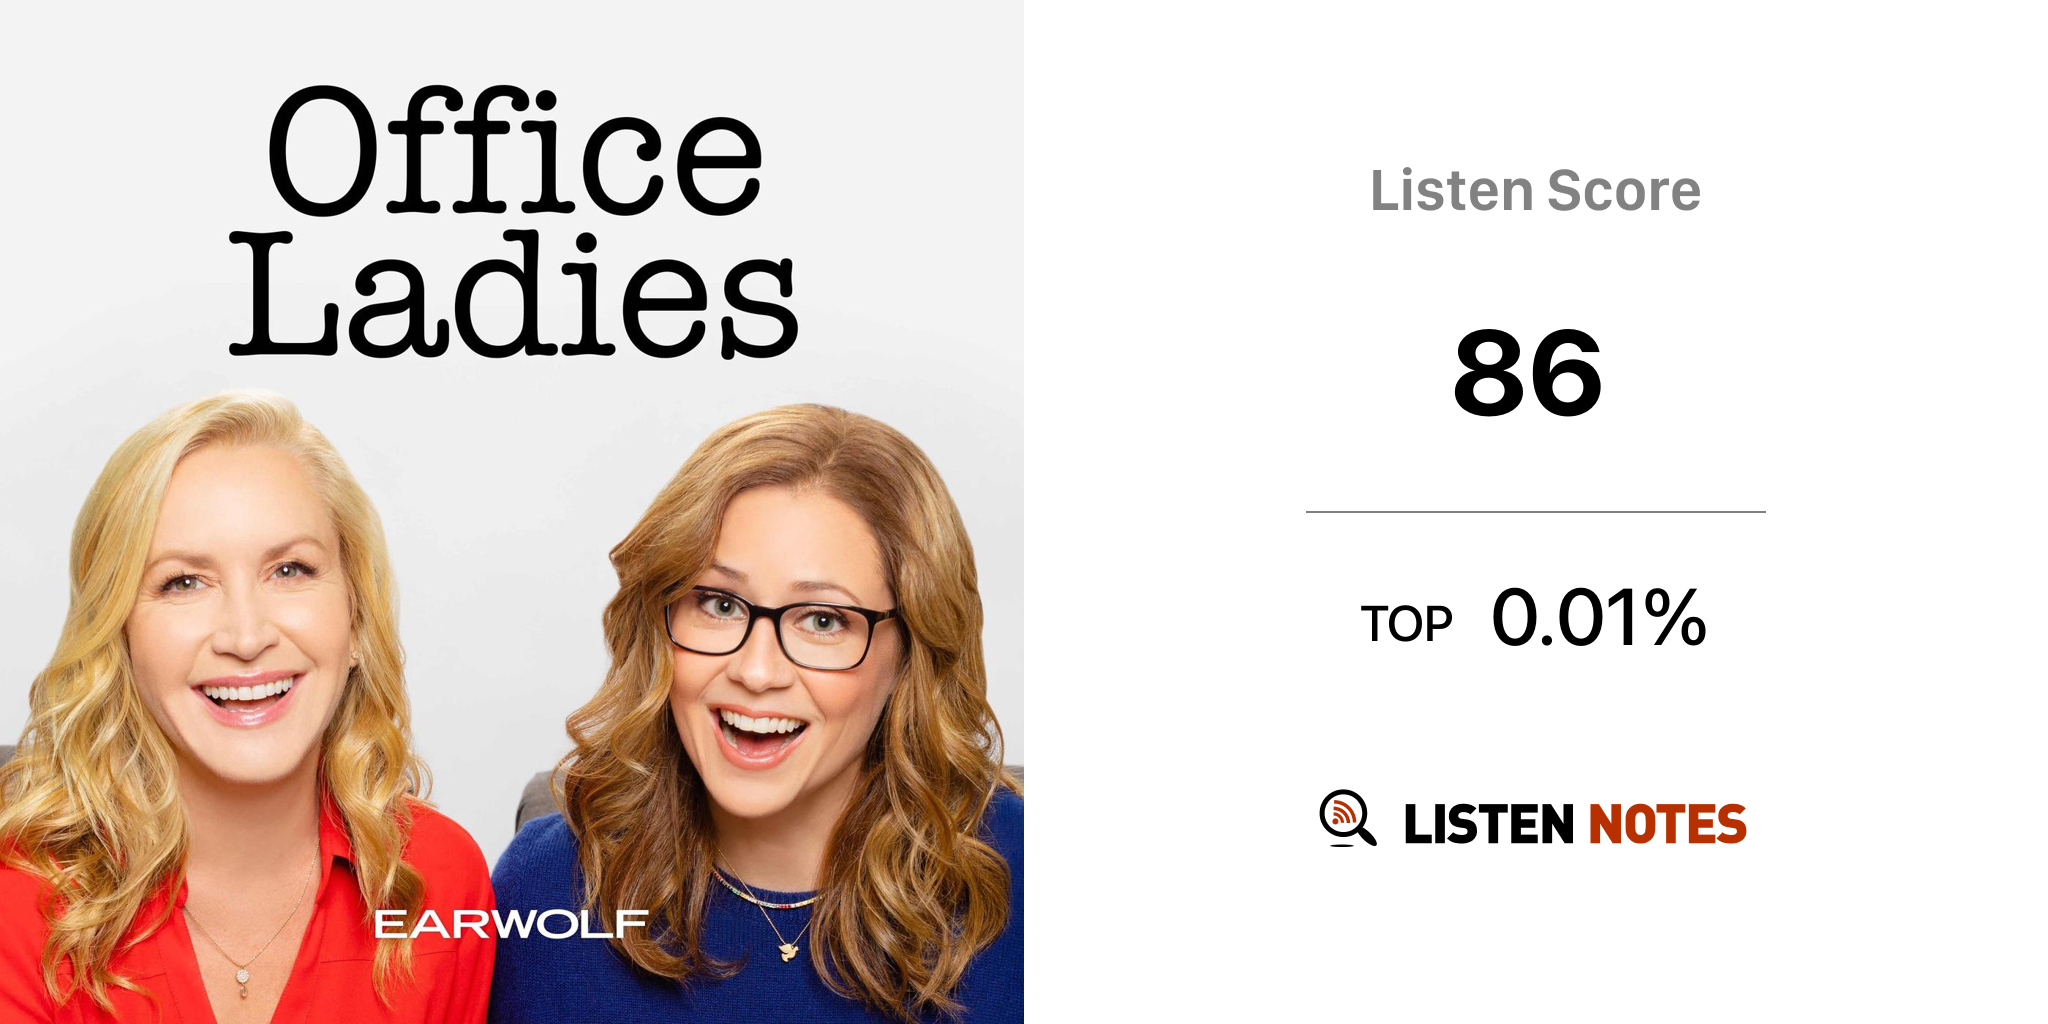 Office Ladies Podcast Earwolf And Jenna Fischer And Angela Kinsey